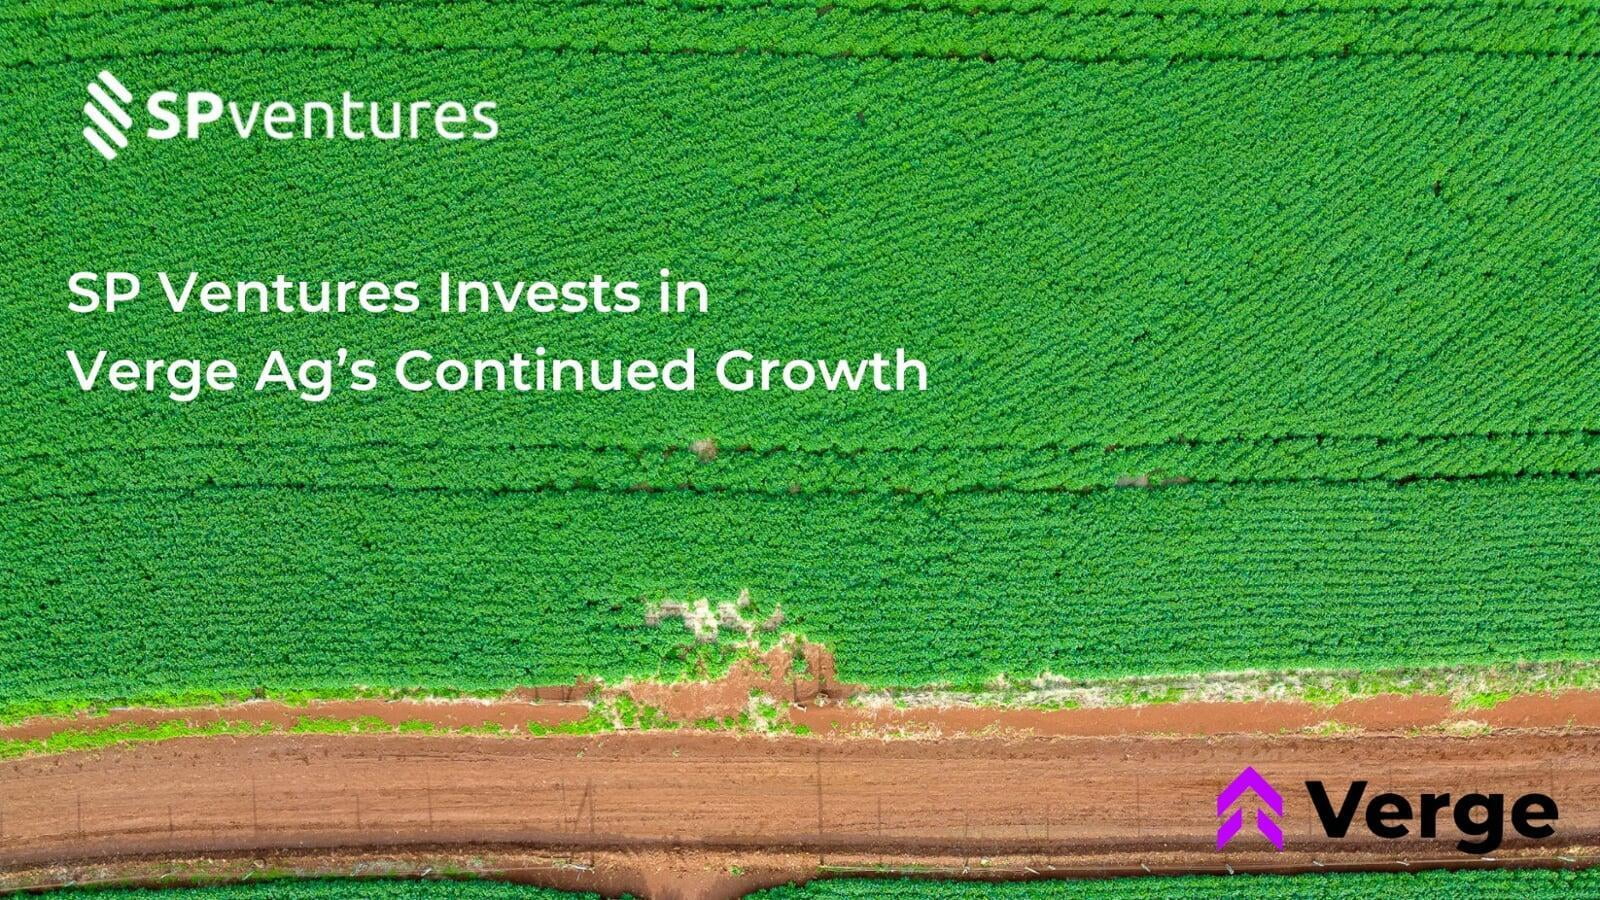 SP Ventures Invests in Verge Ag’s Continued Growth